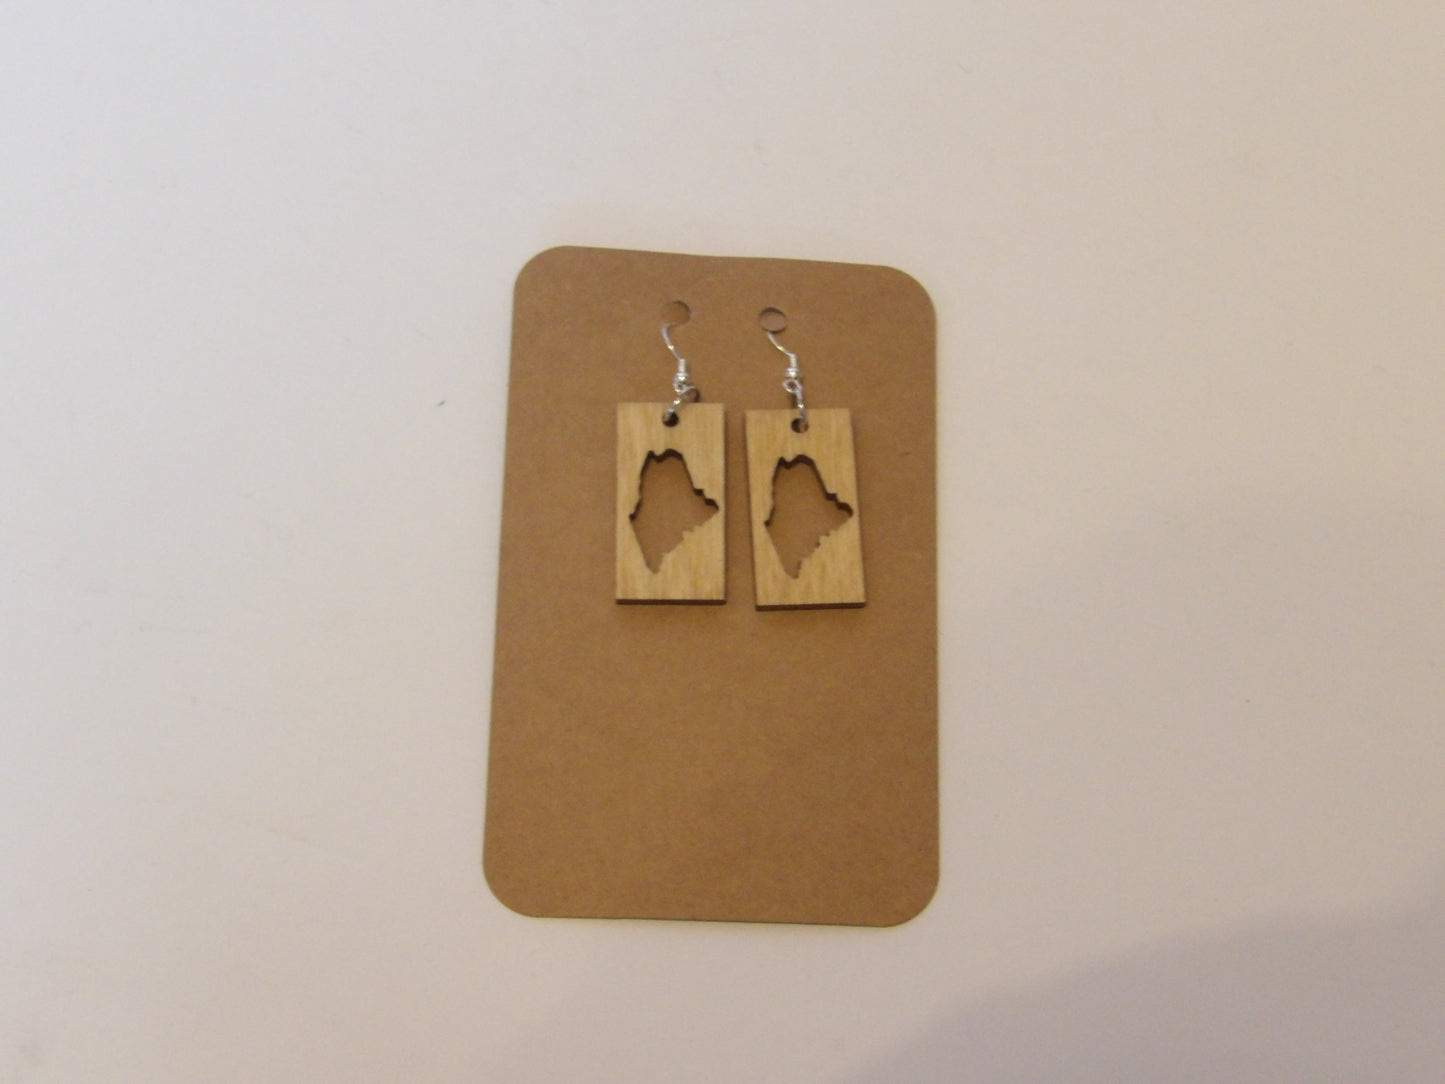 State of Maine Rectangle Dangle Wooden Earrings